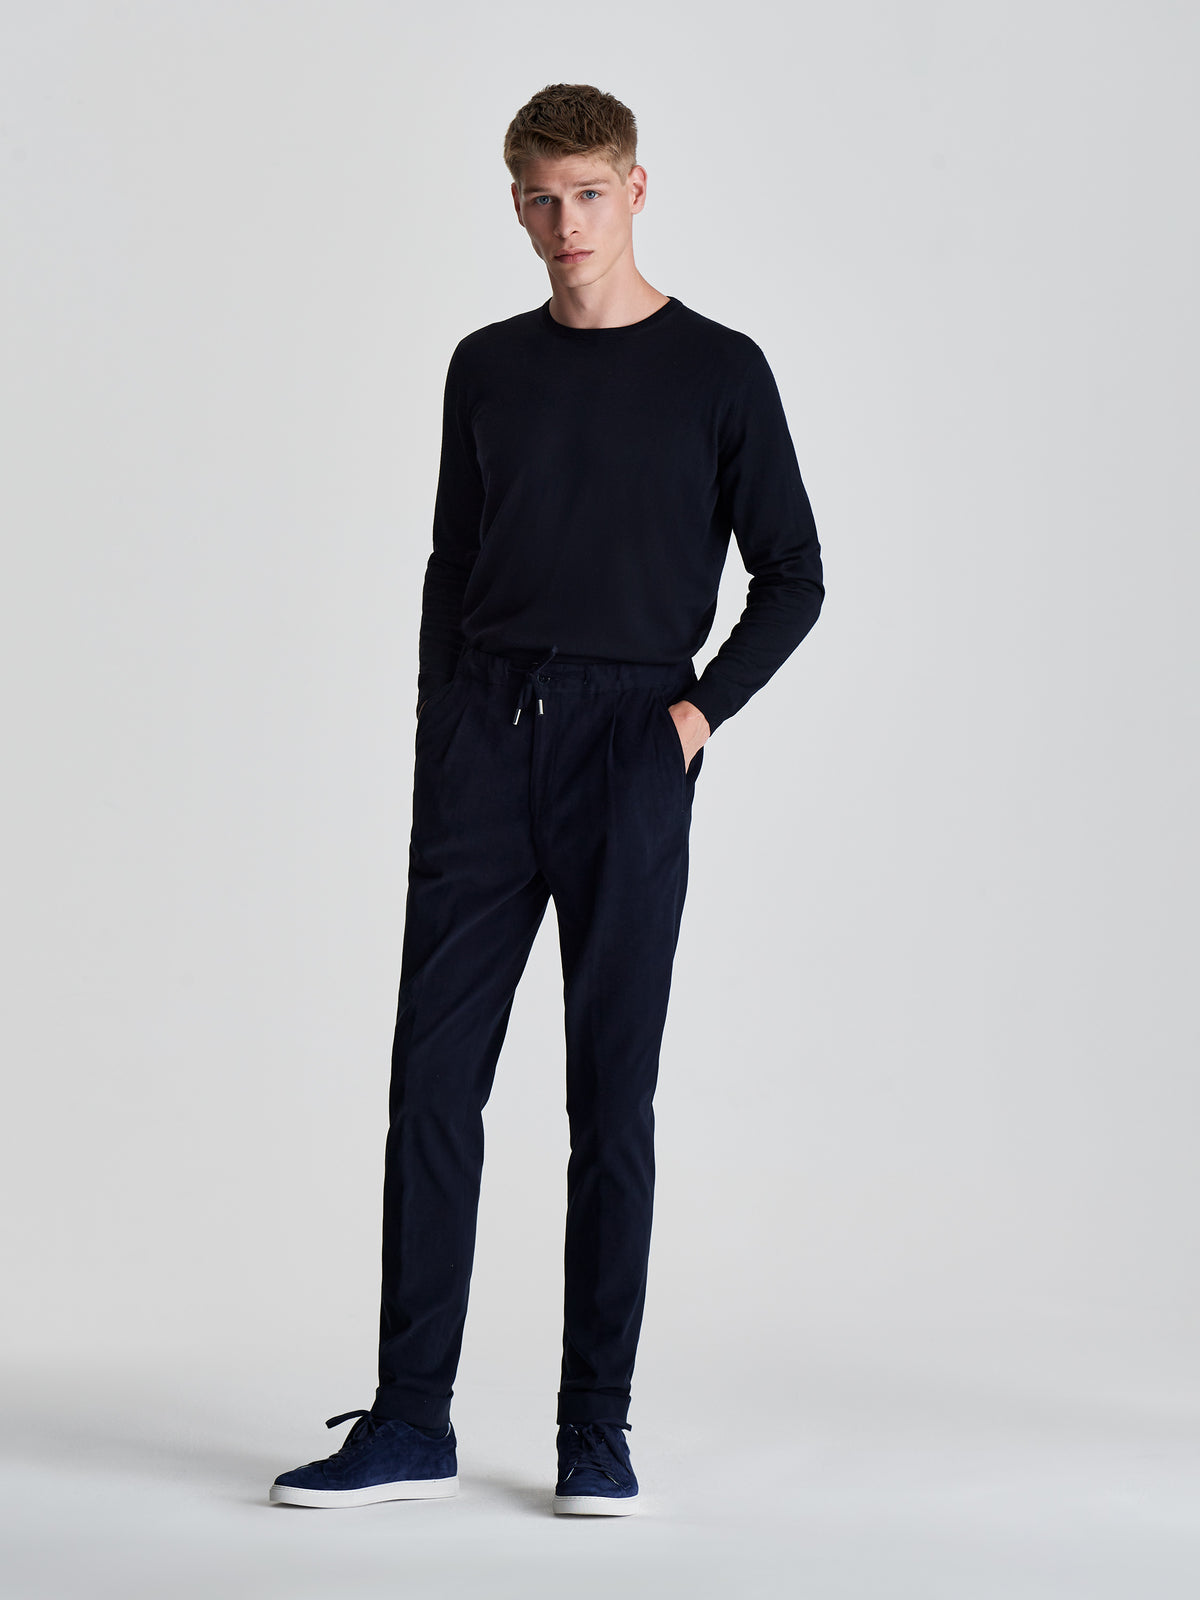 Brushed Cotton Casual Tailored Trousers Navy Model Image